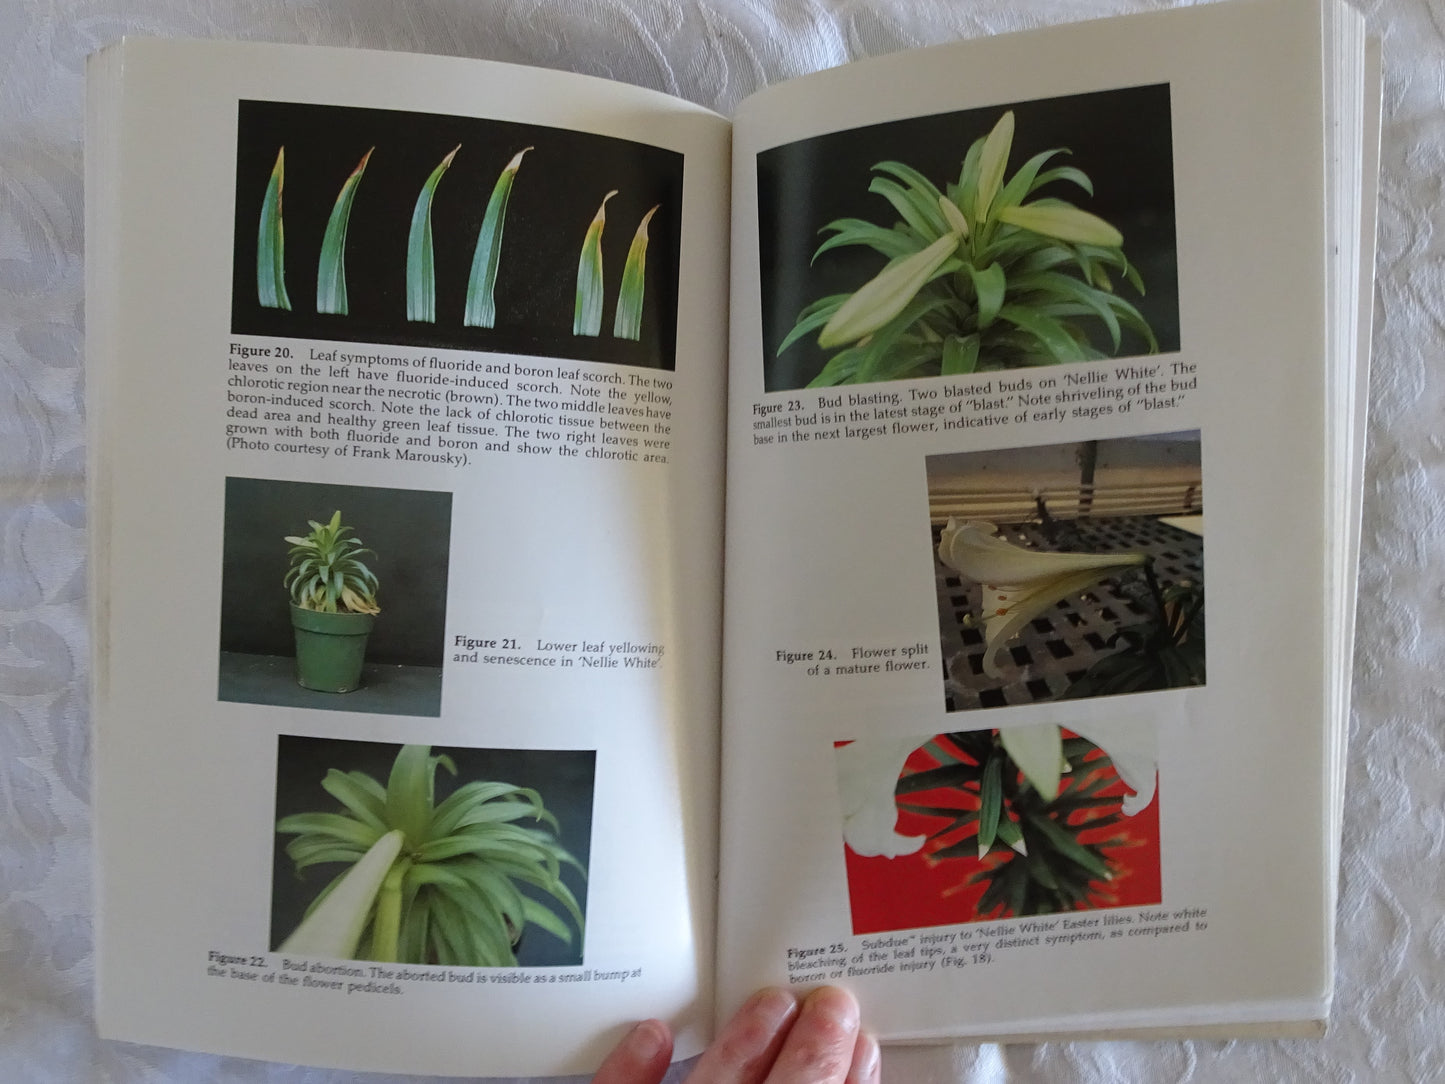 Easter And Hybrid Lily Production by William B. Miller